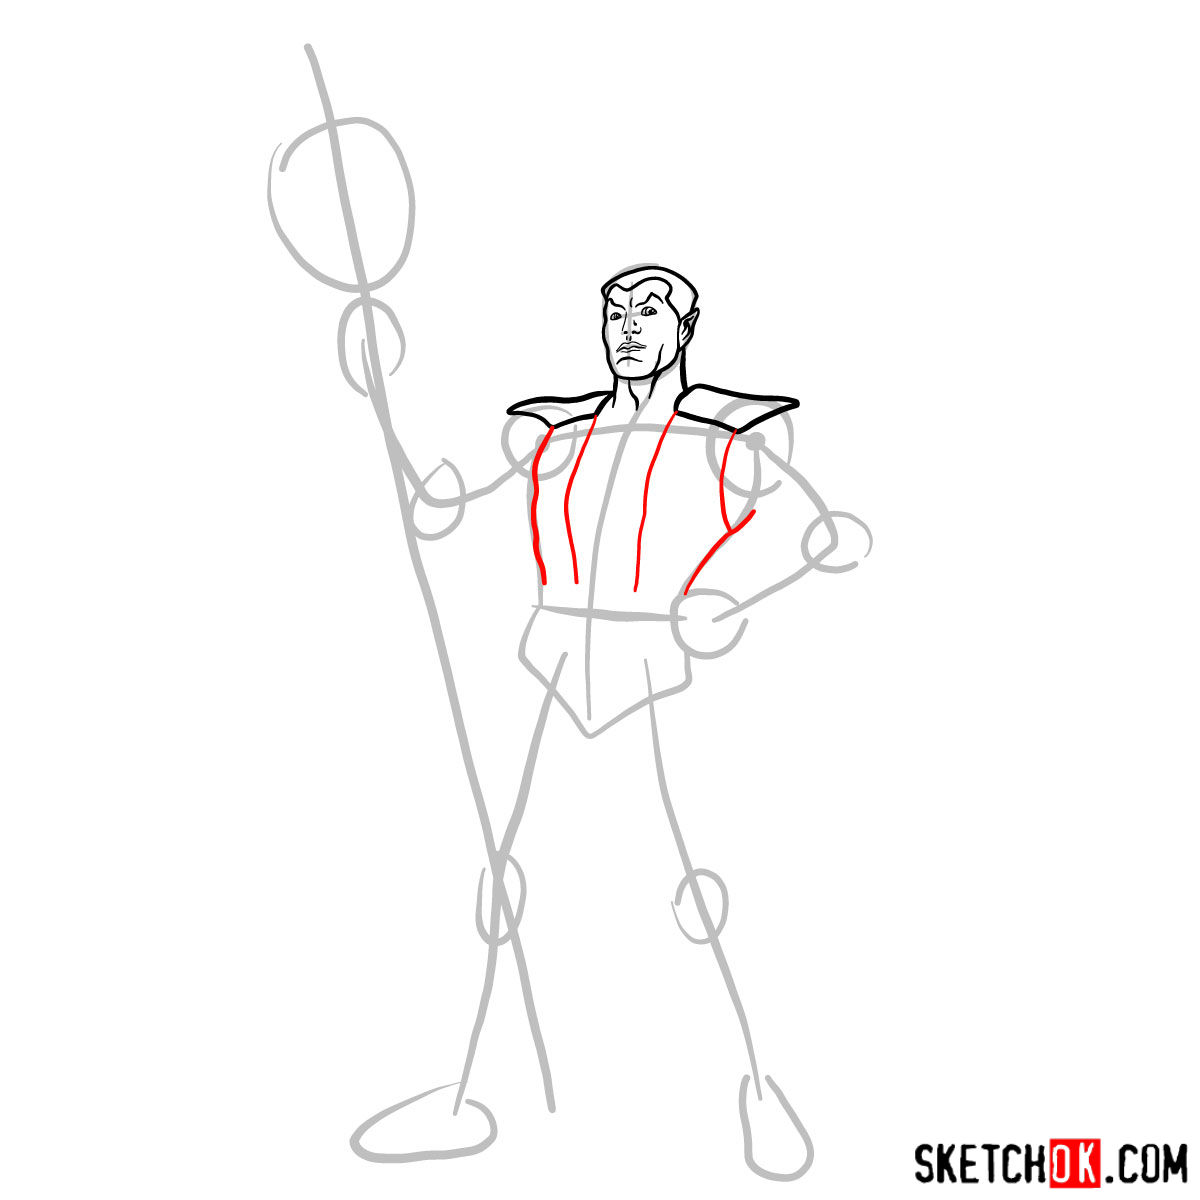 How to draw Namor the Sub-Mariner from Marvel Comics - step 05